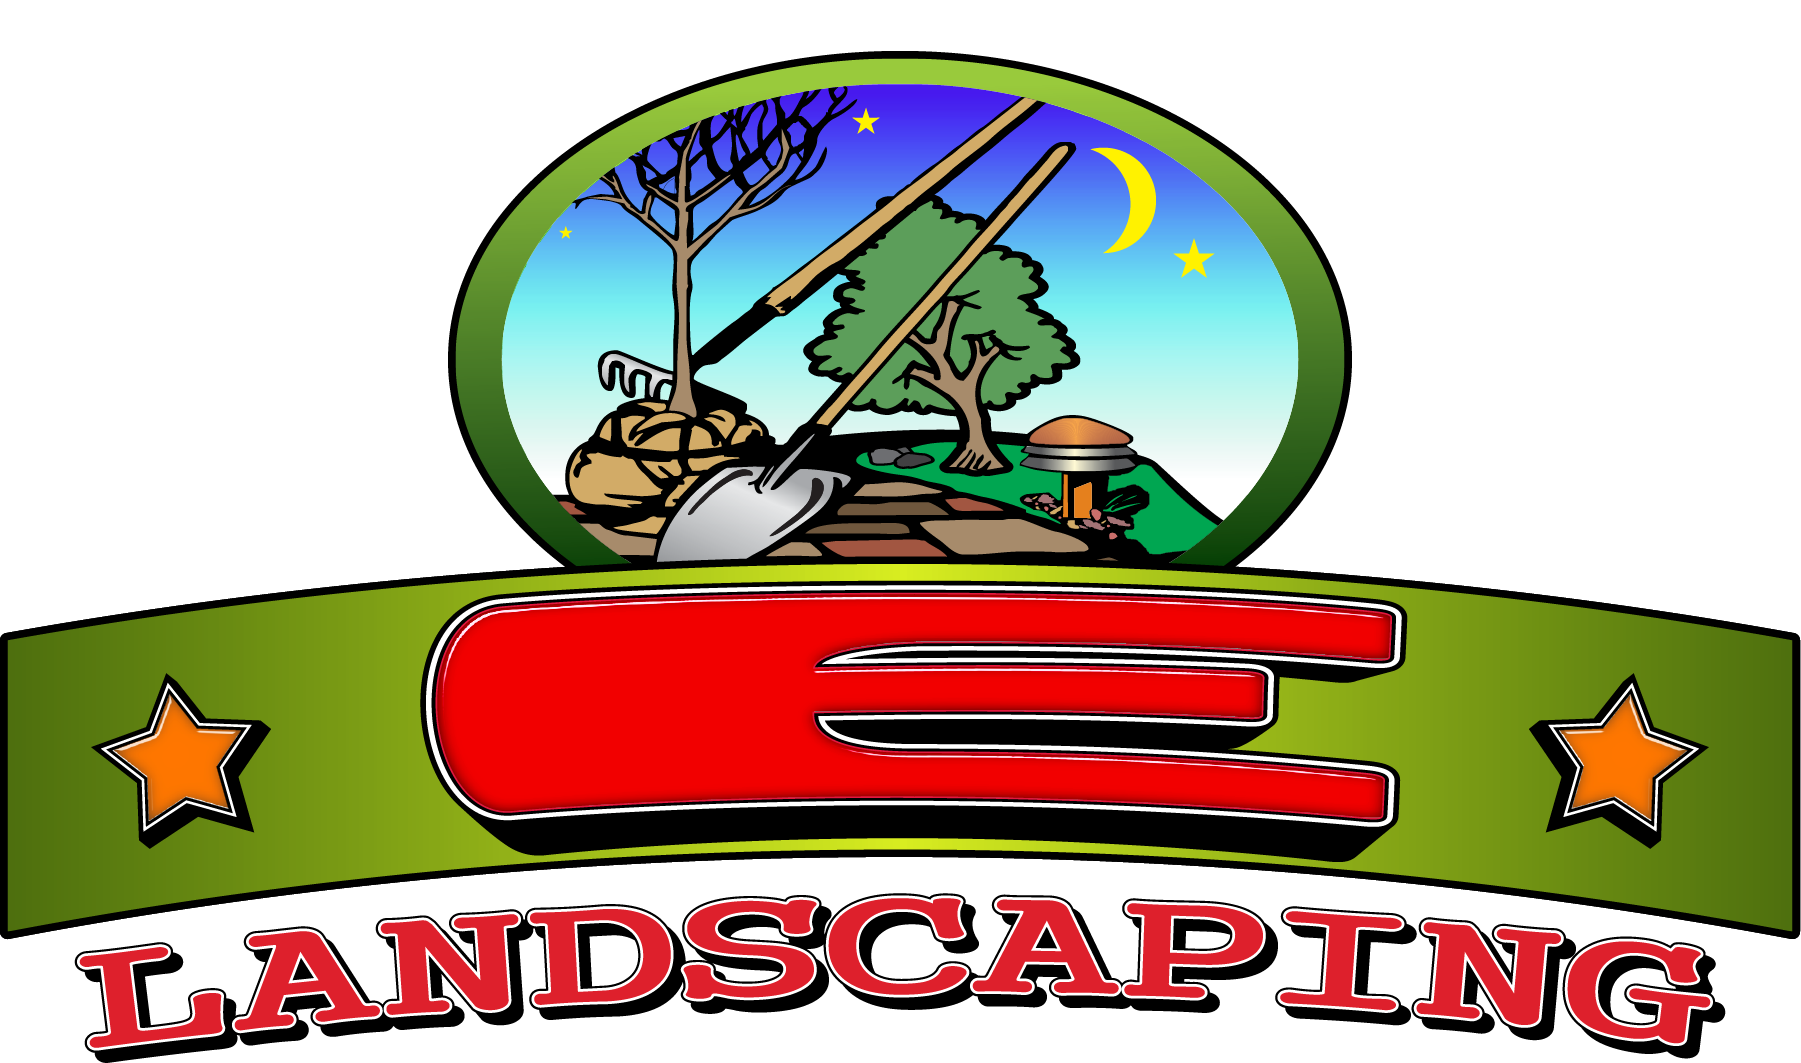 E Landscaping - Treasure Valley Landscaping, Patio & Sprinkler Professionals